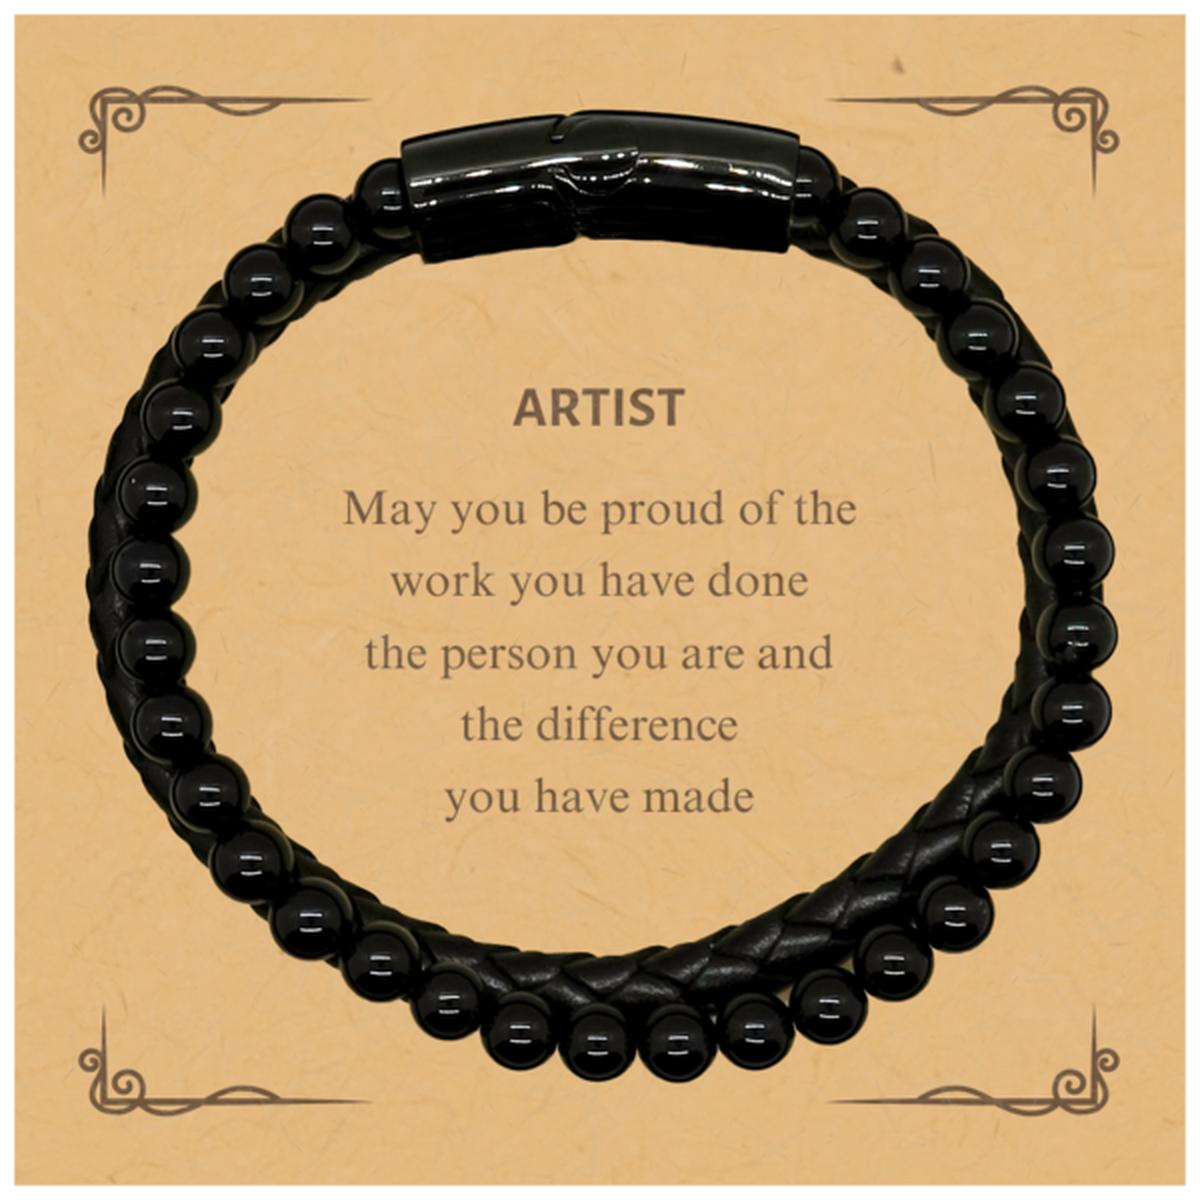 Artist May you be proud of the work you have done, Retirement Artist Stone Leather Bracelets for Colleague Appreciation Gifts Amazing for Artist